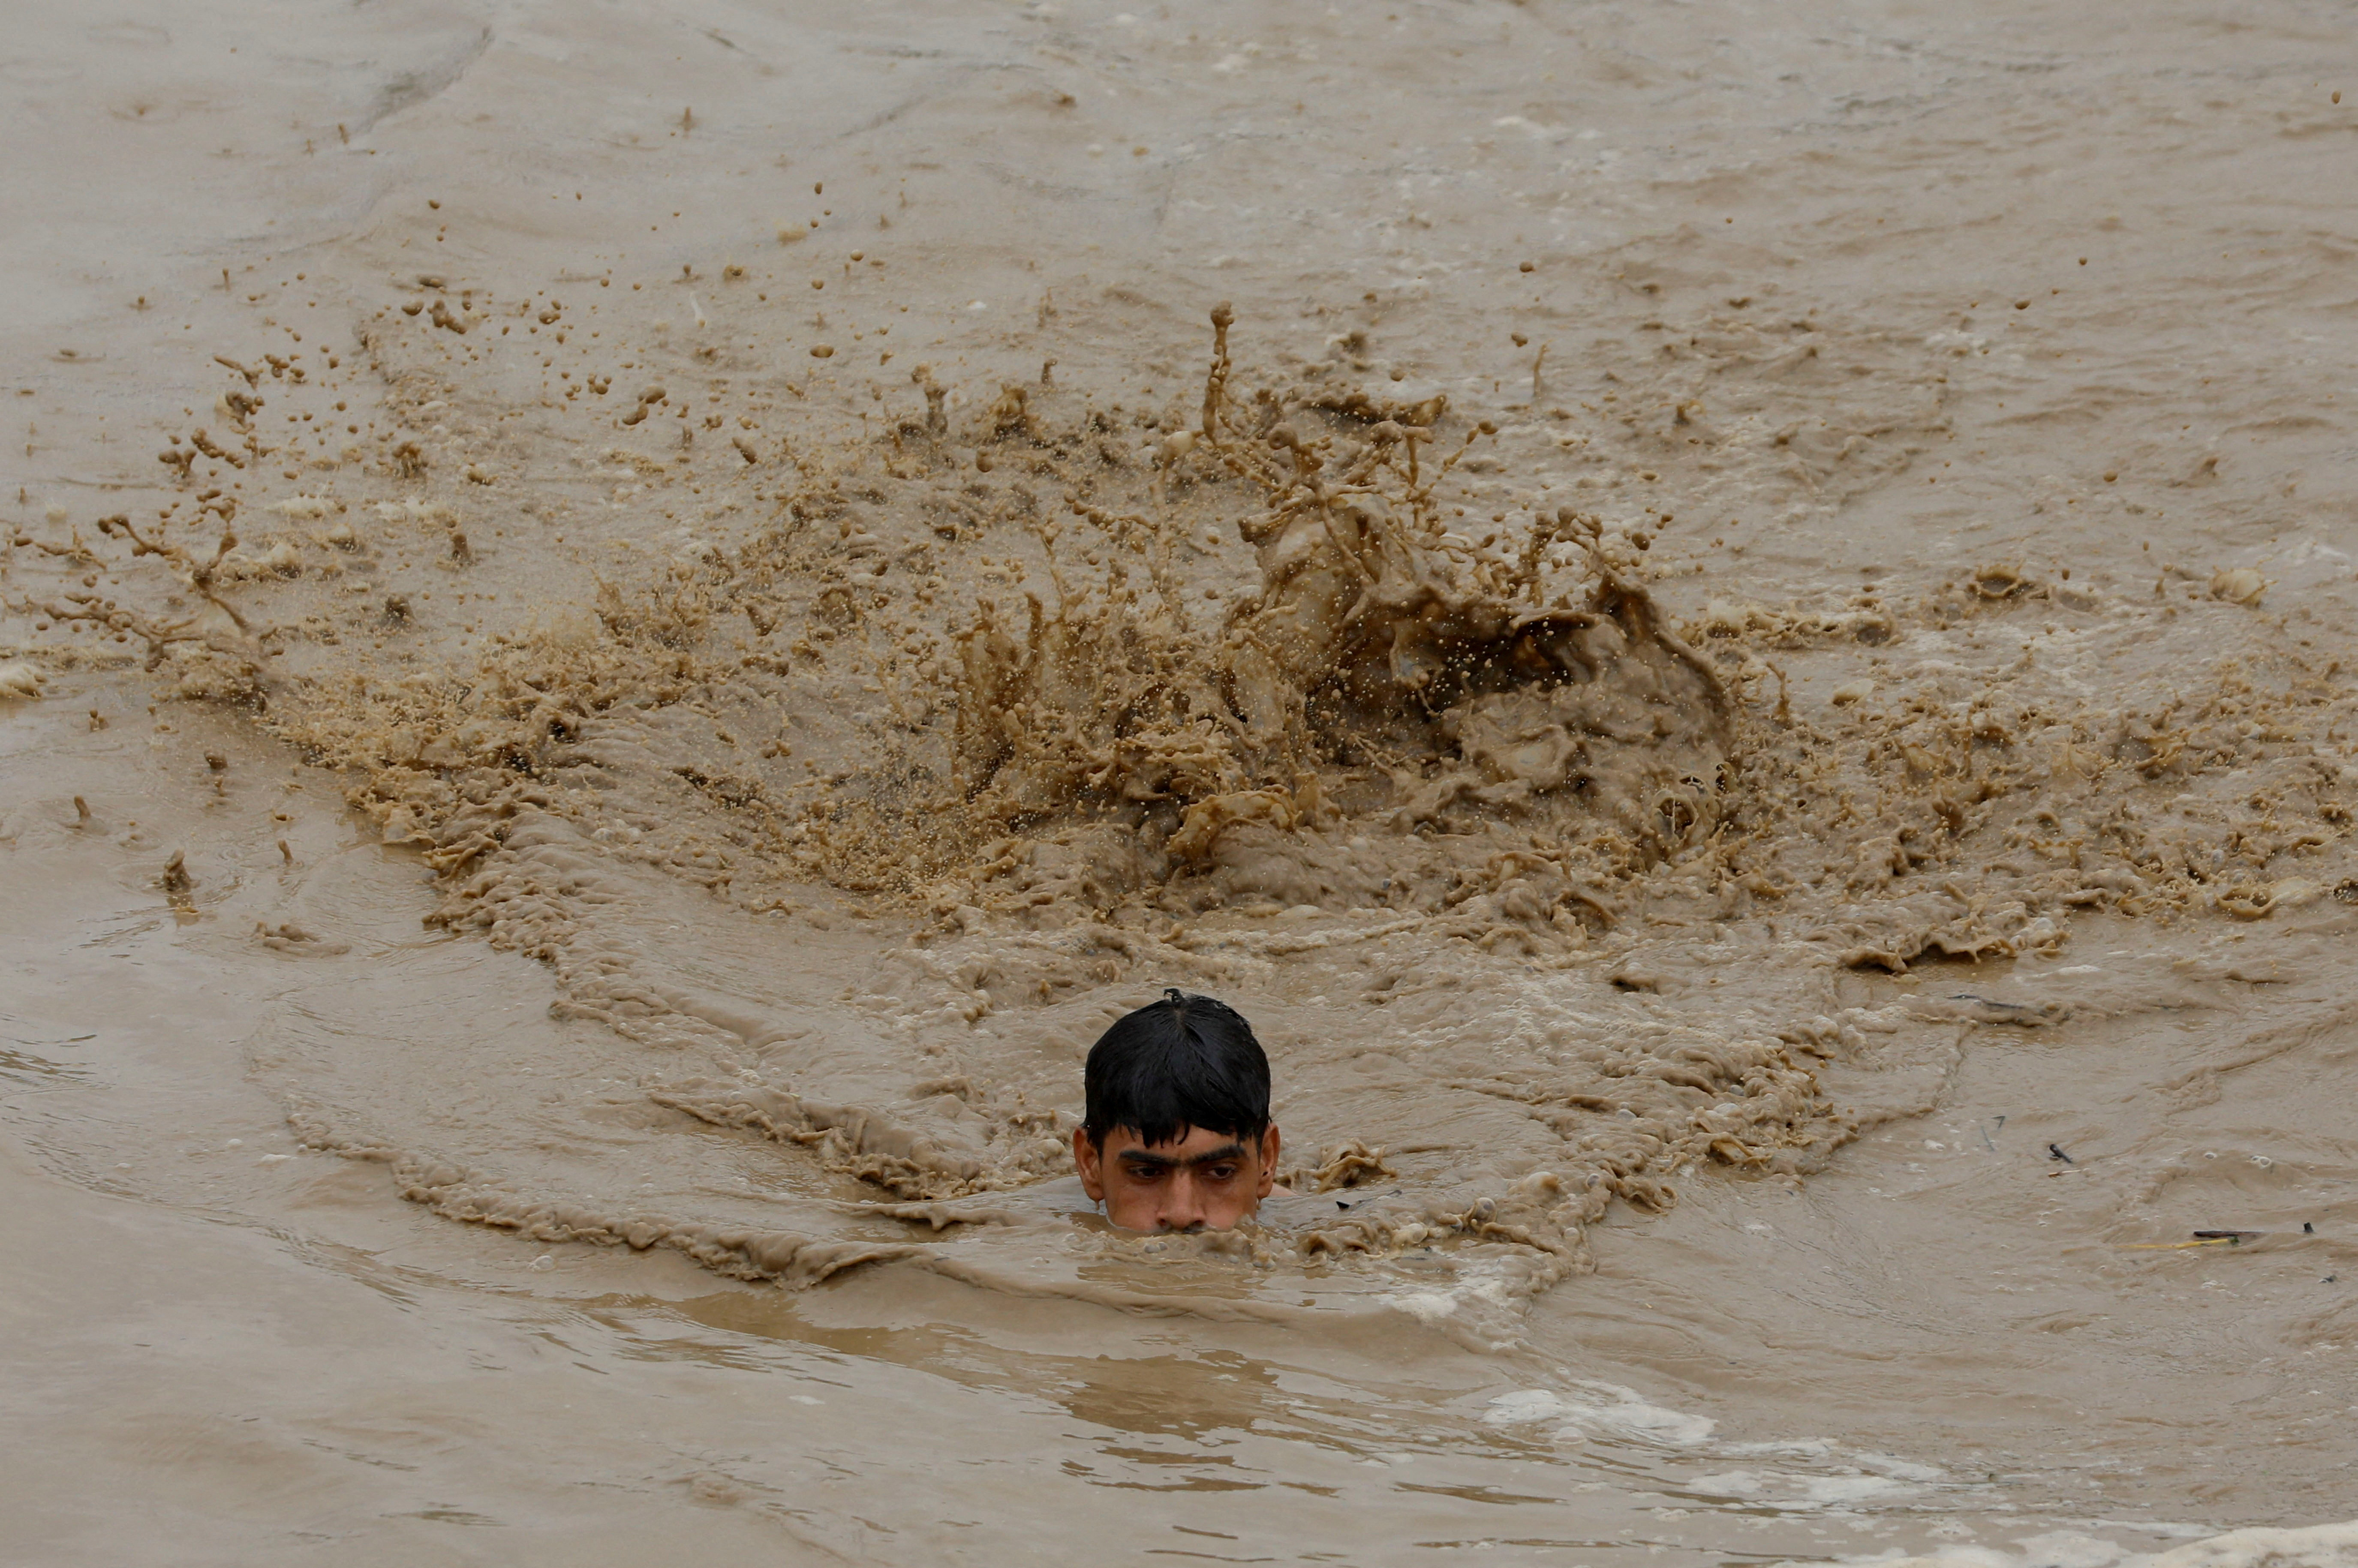 A man swims in flood waters while heading for a higher ground, following rains and floods during the monsoon season in Charsadda, Pakistan. /Fayaz Aziz/Reuters
